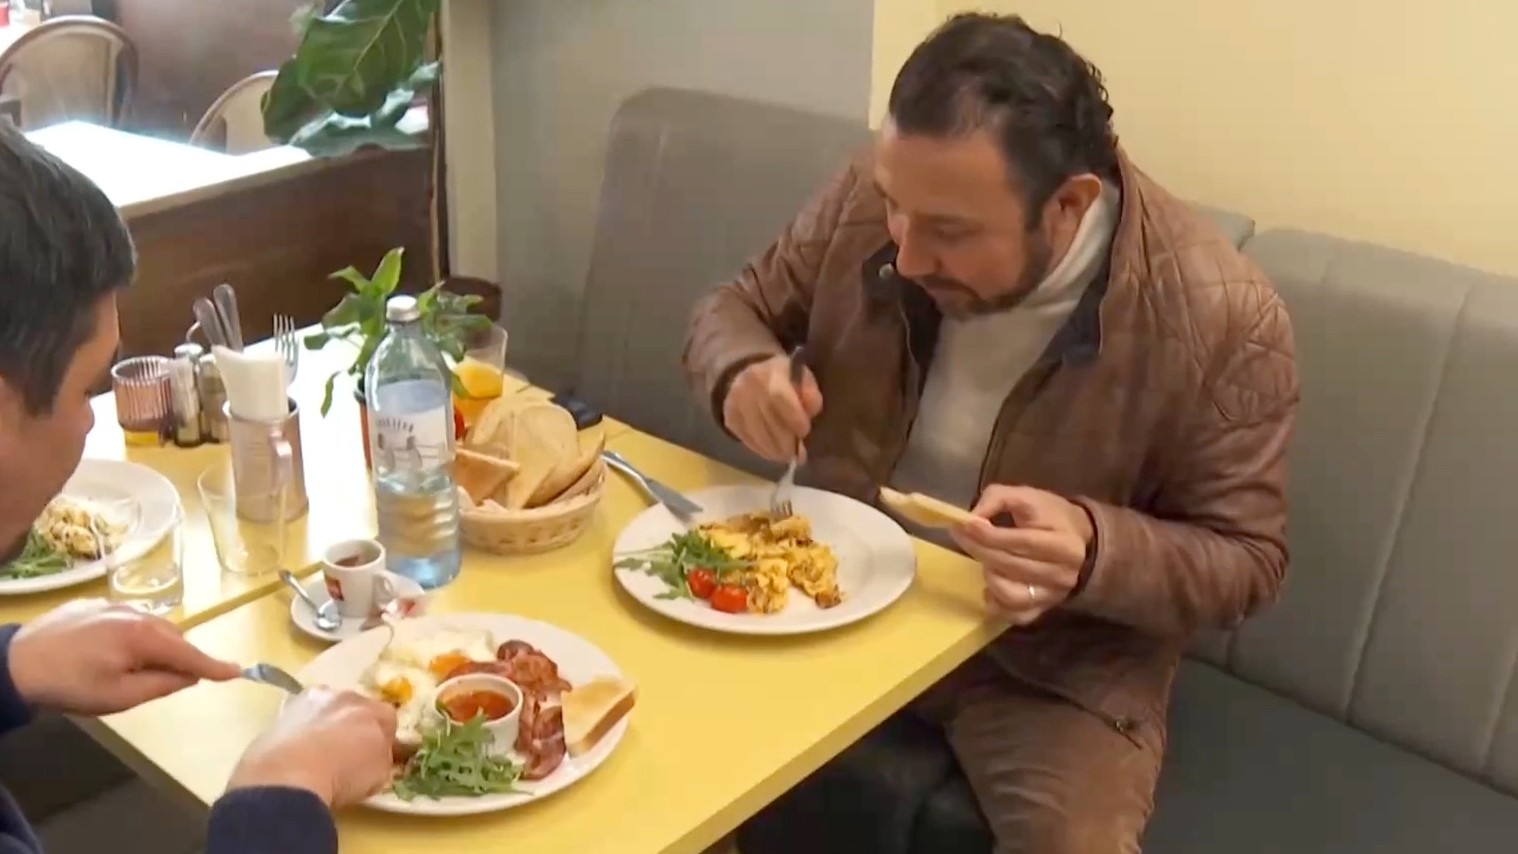 CGTN's Pablo Guttierez tucks into an egg-based meal... but for how long will that be an option? /CGTN